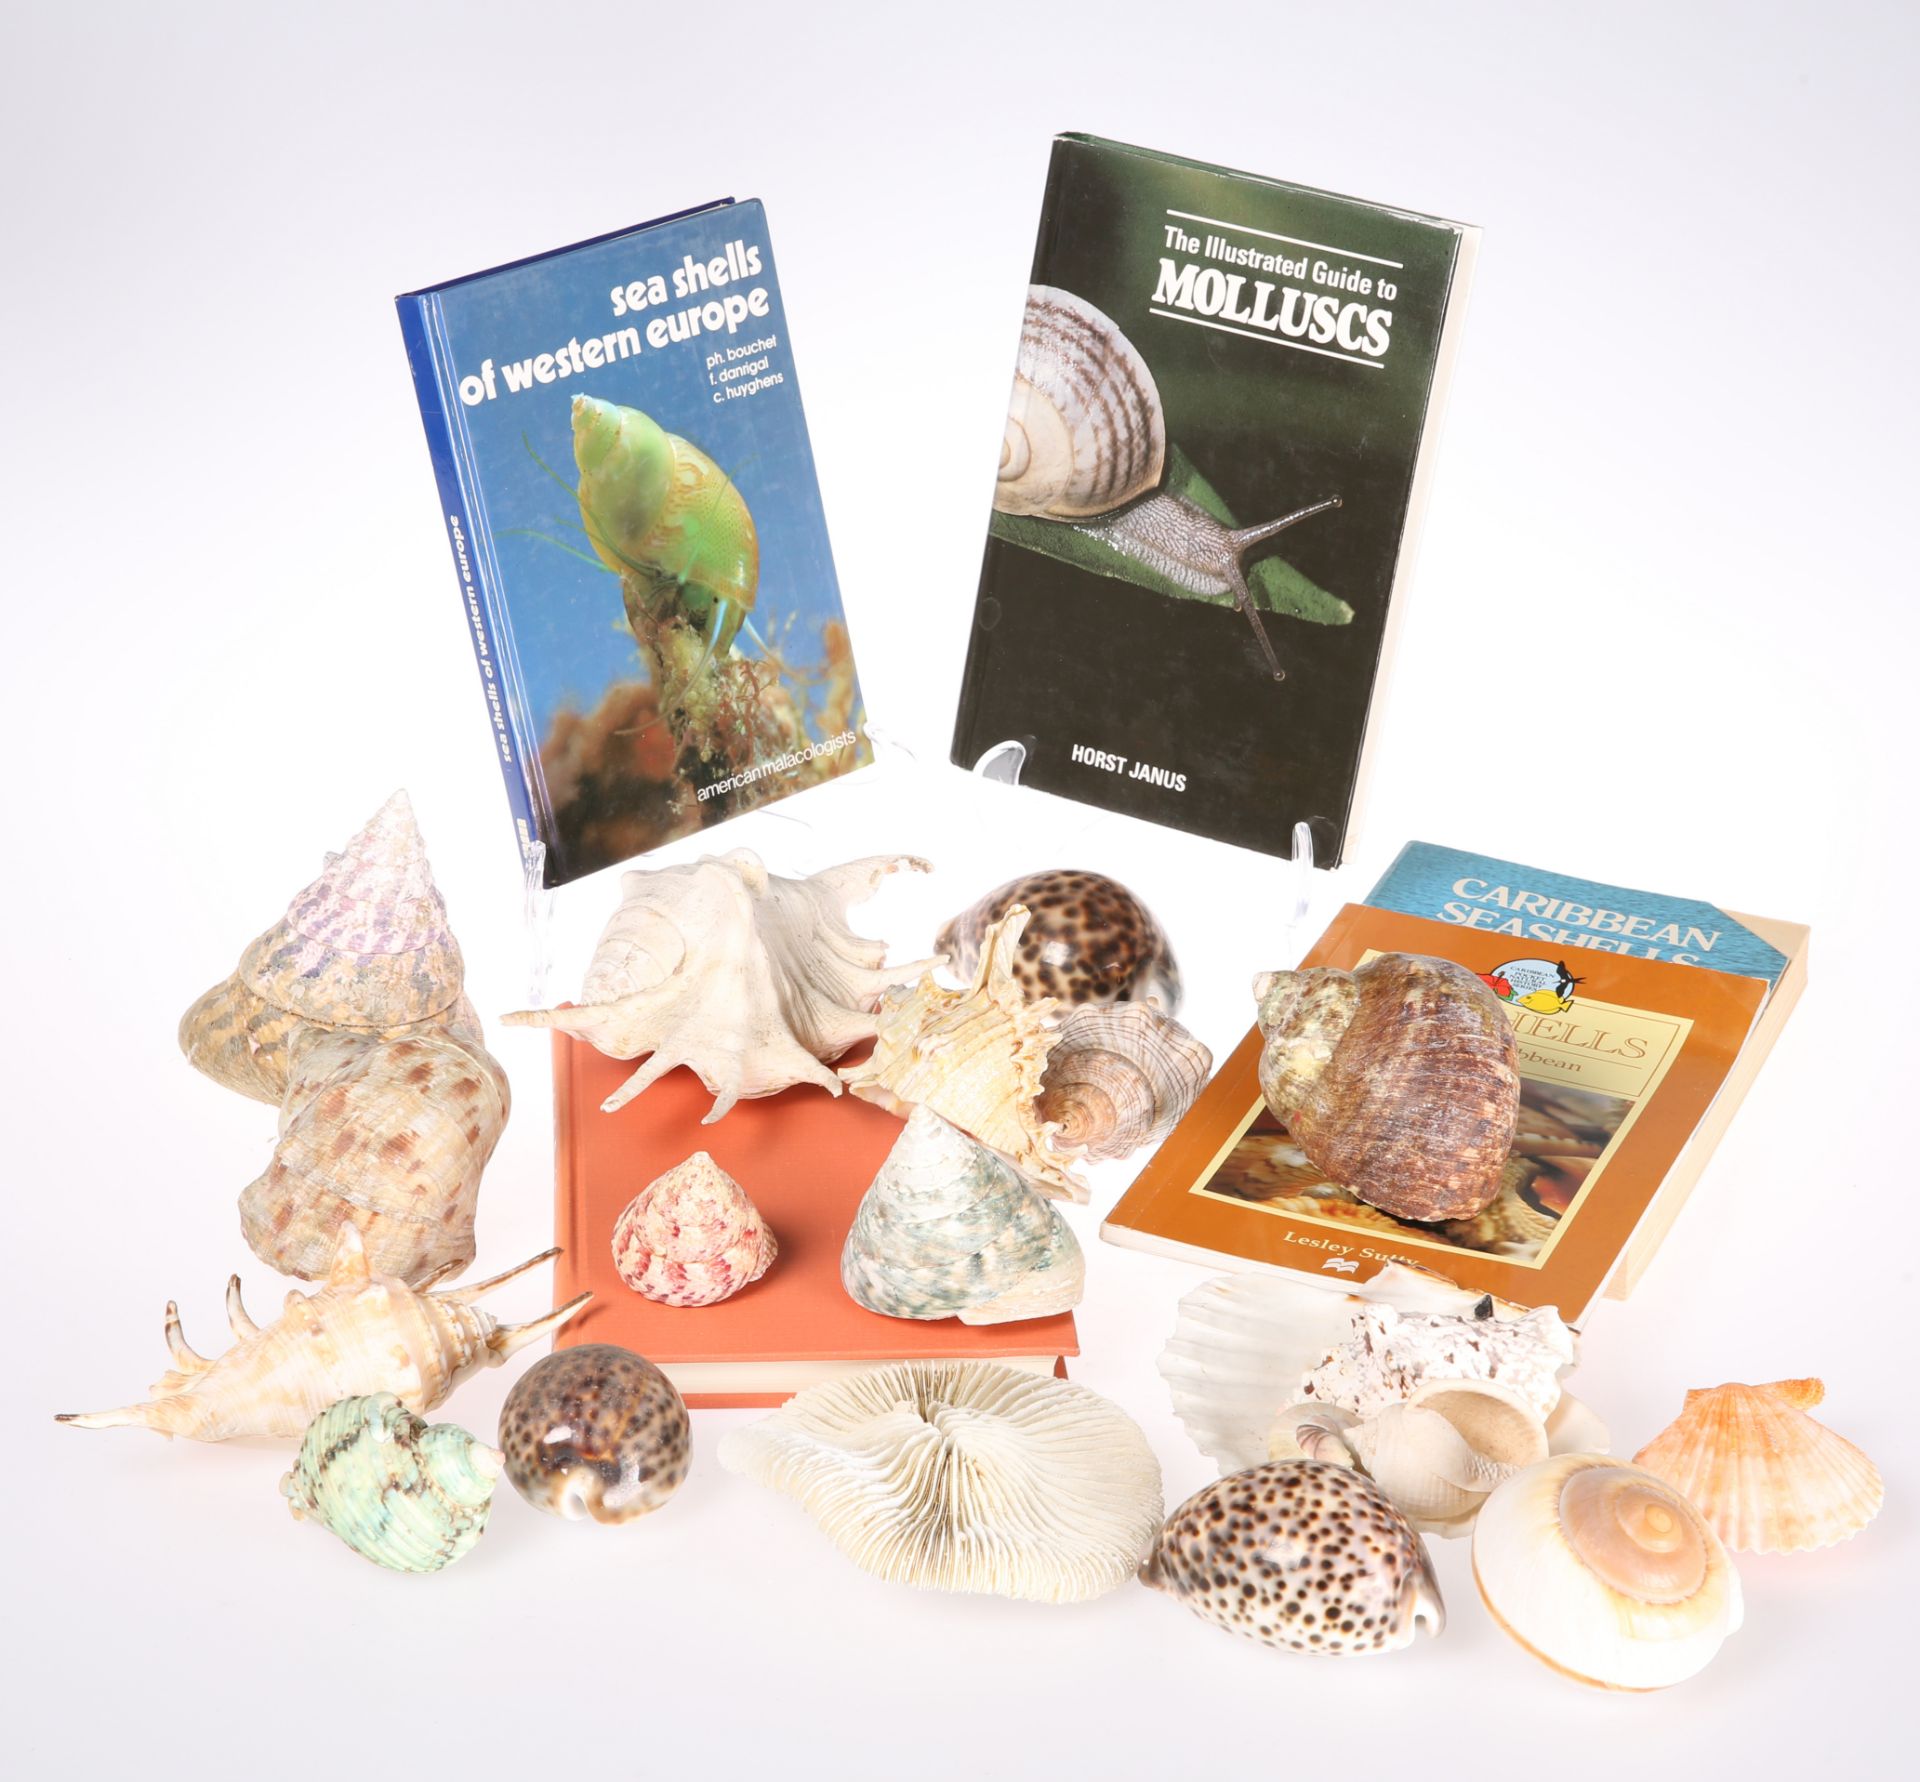 A COLLECTION OF SHELLS, FOSSILS AND BOOKS ON THE SUBJECT